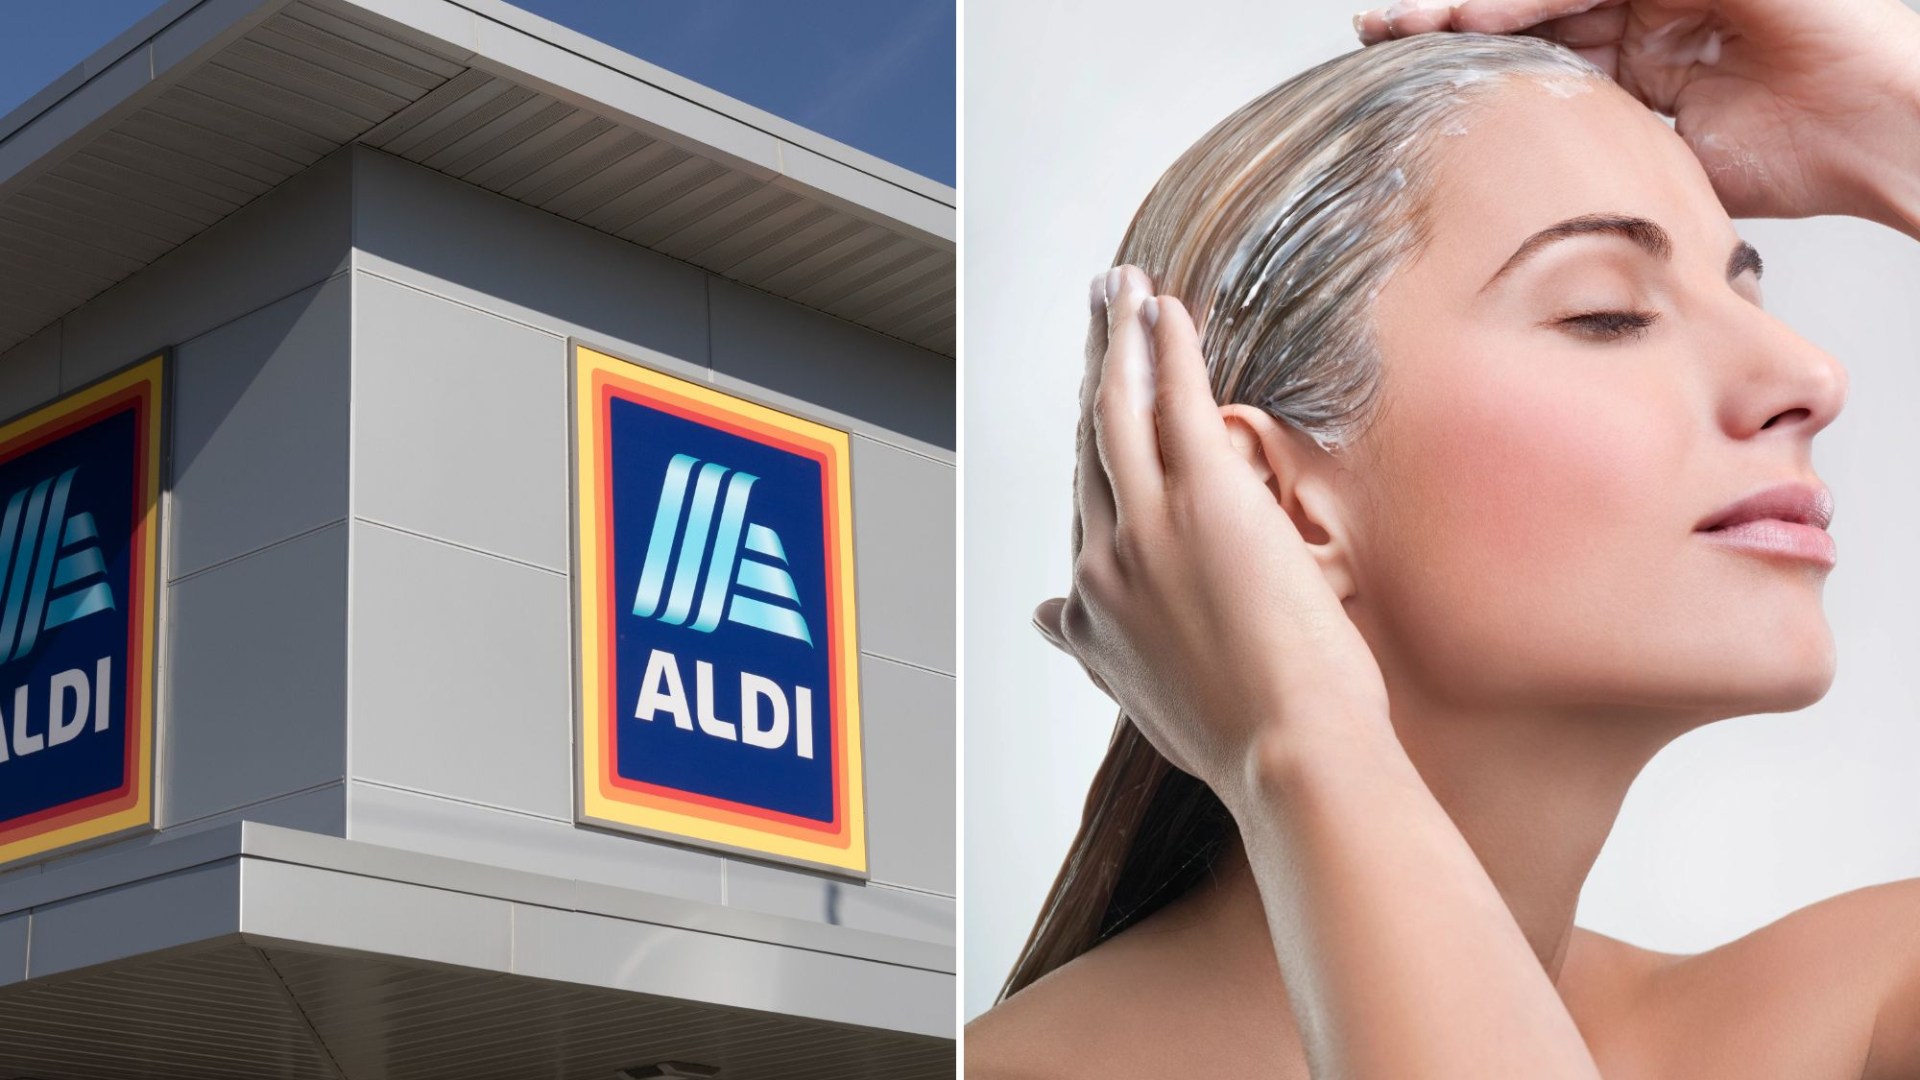 Aldi releases new hair mask for thicker and longer hair at less than a fiver – and it’s a dupe for 40 product [Video]